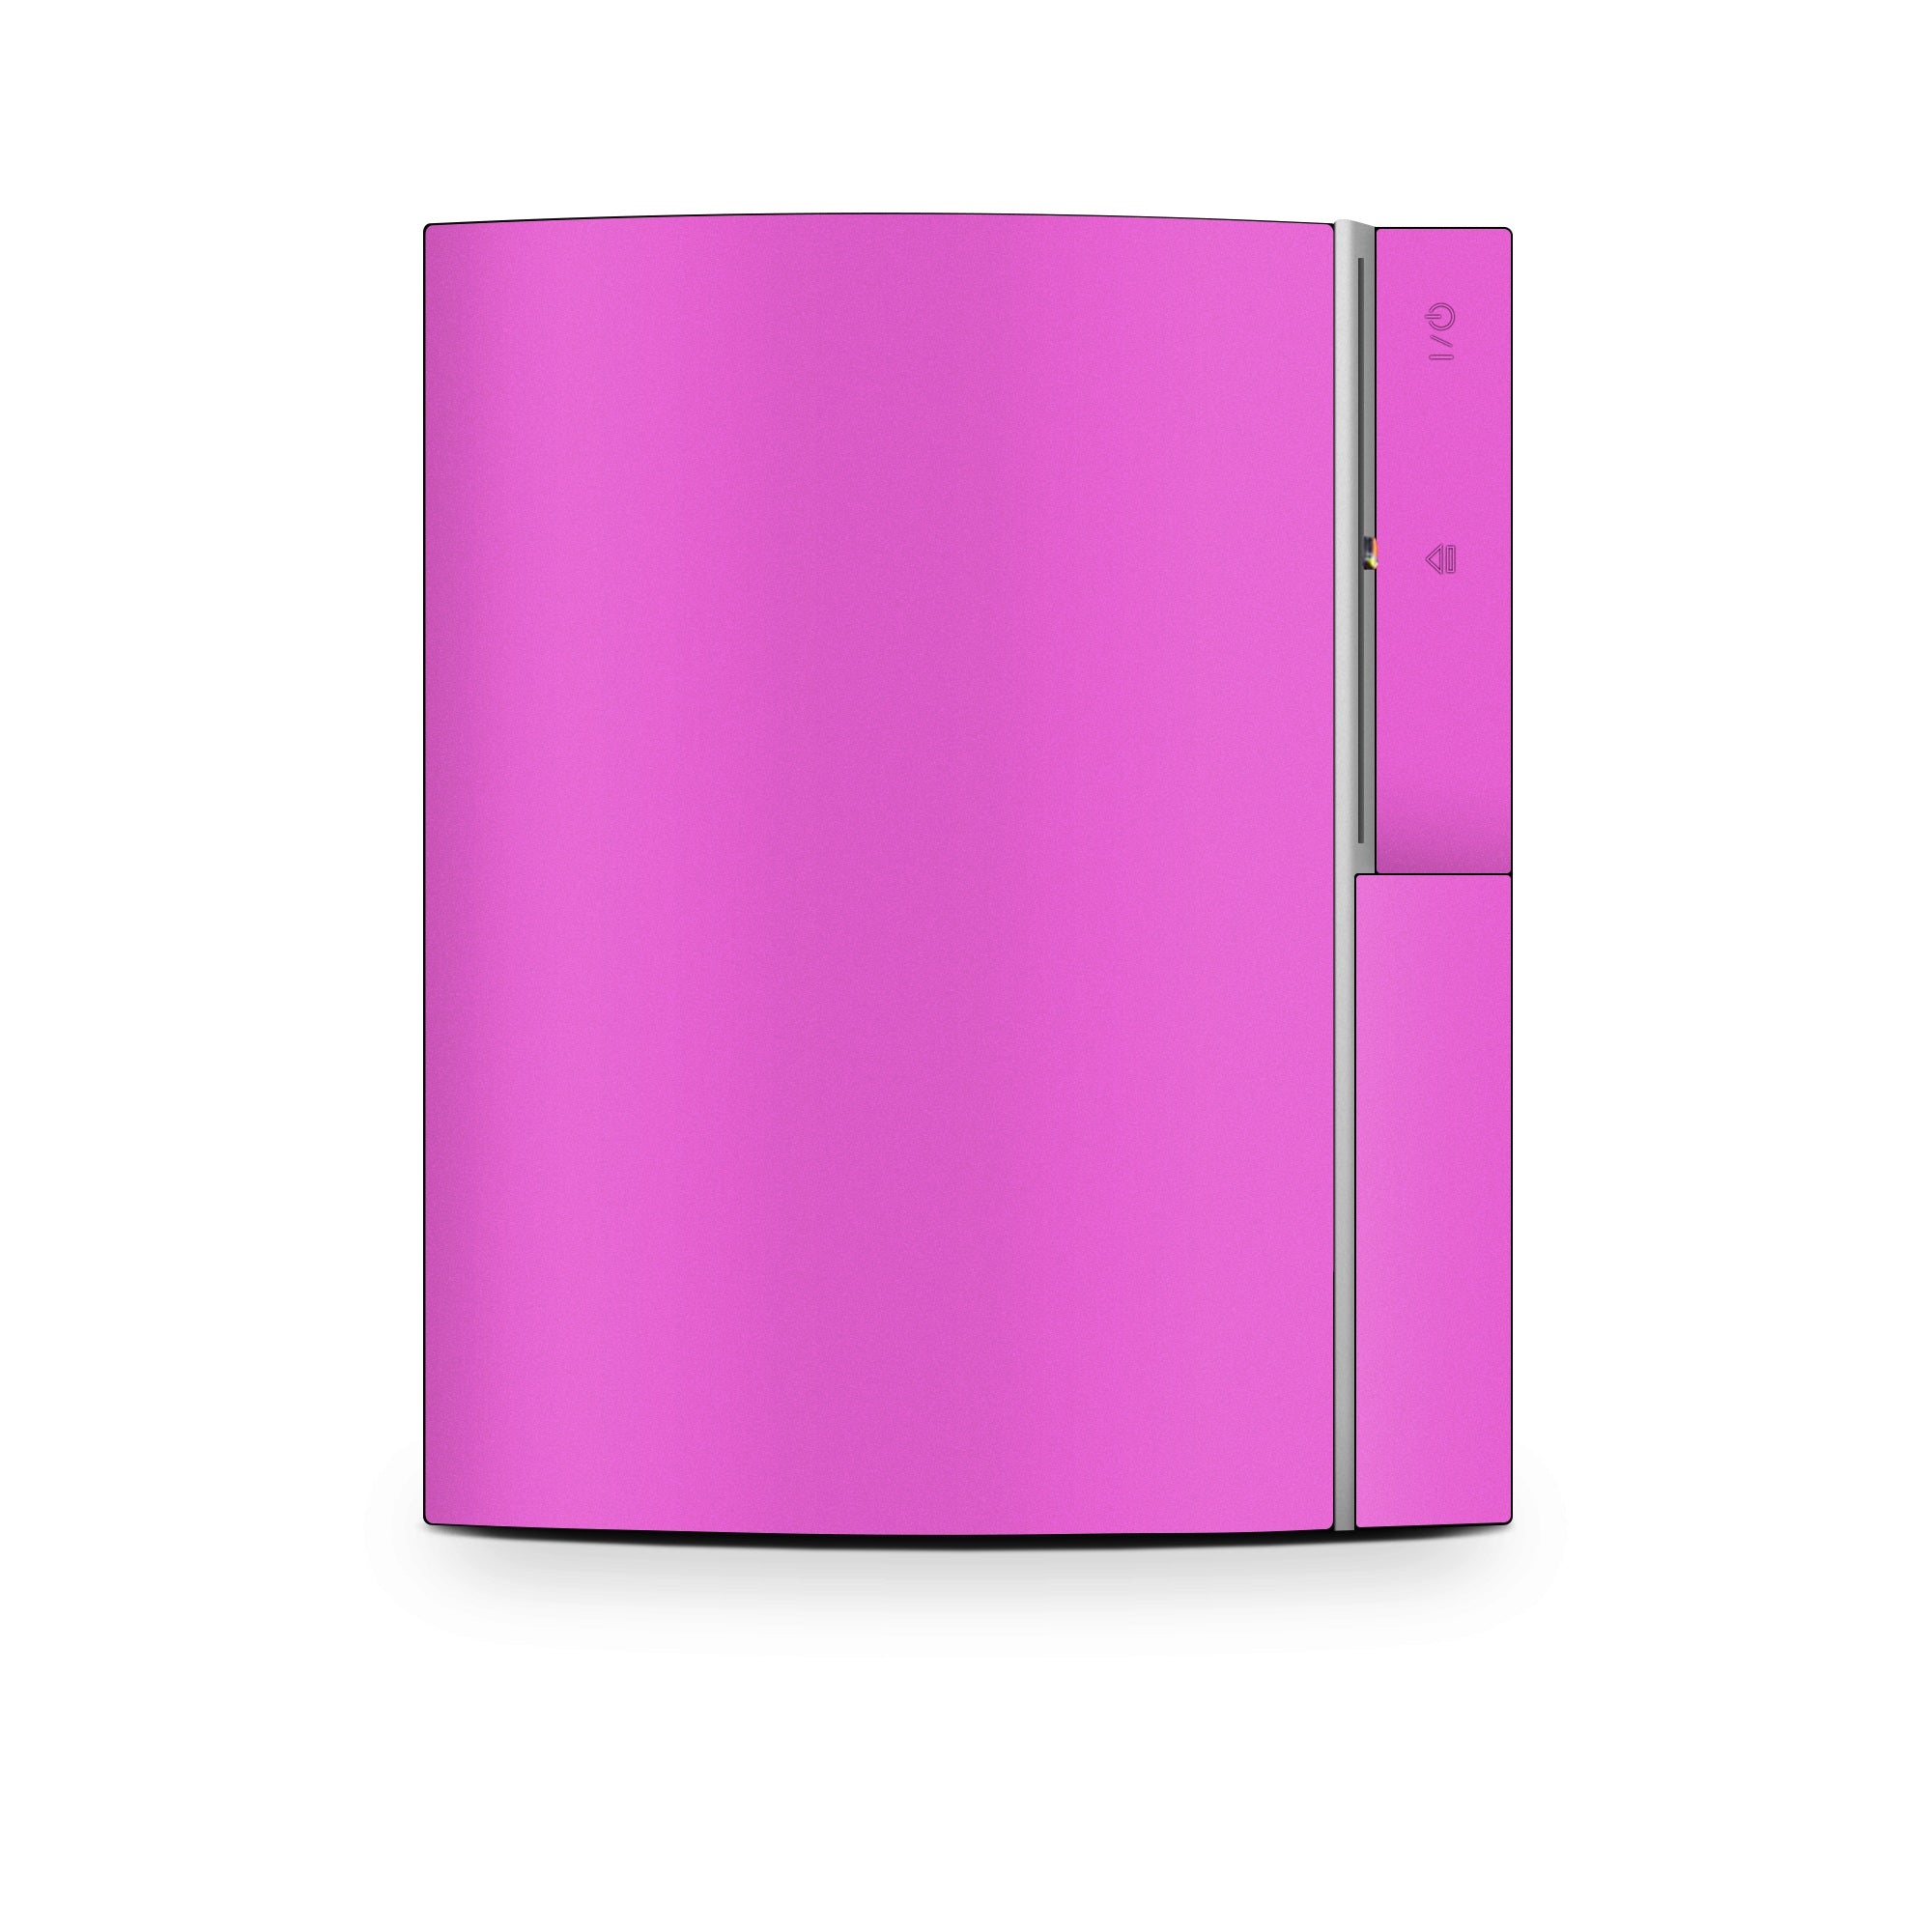 Solid State Vibrant Pink - Sony PS3 Skin